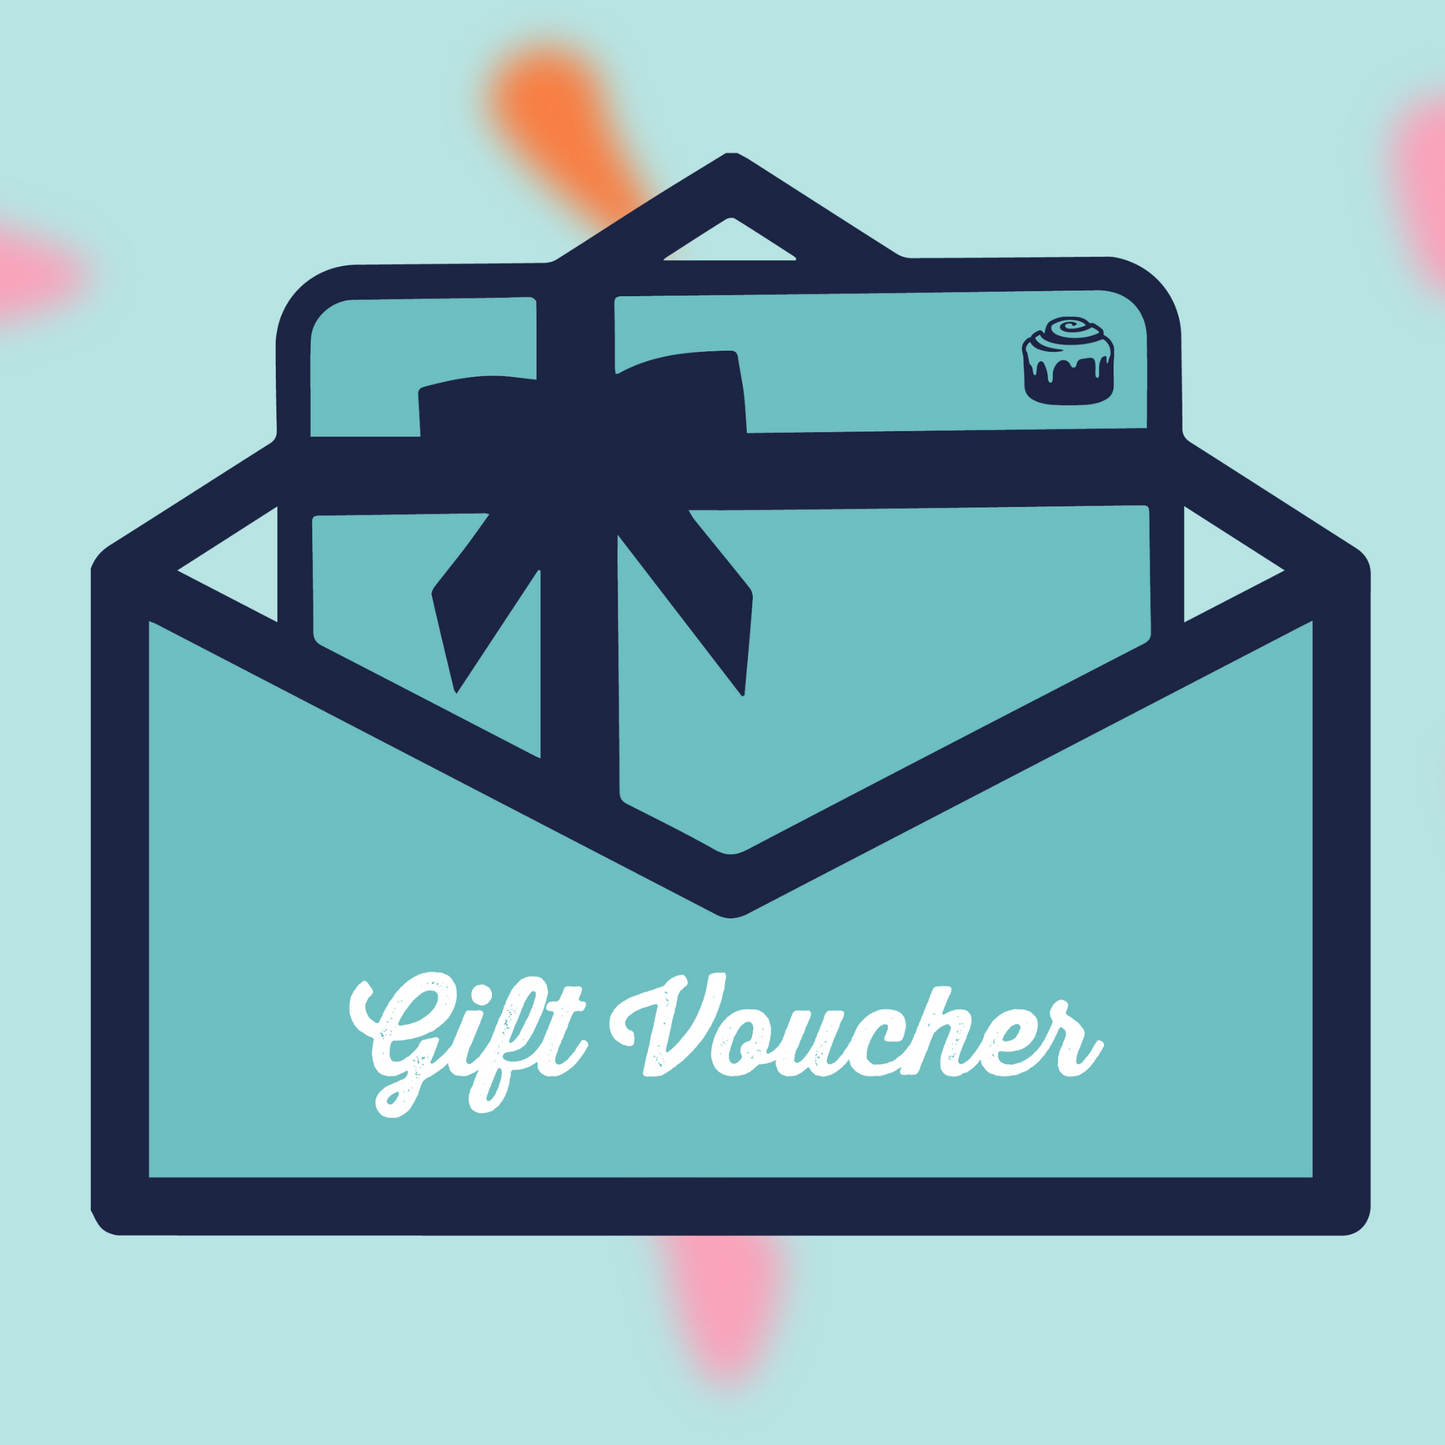 Gifting with Vouchers